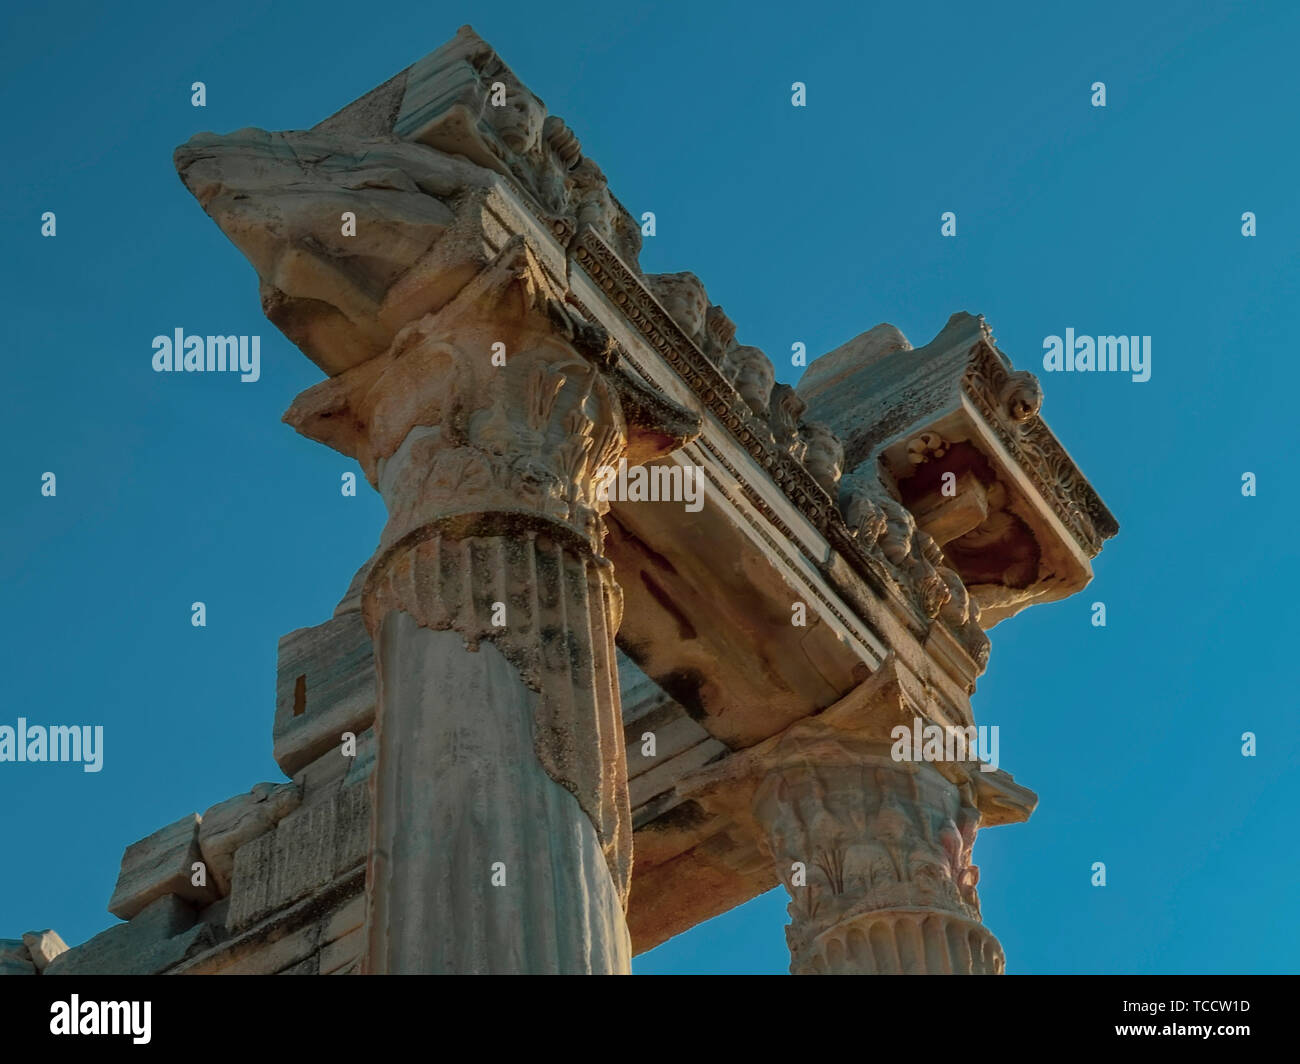 The ruins of the Temple of Apollo in ancient sity of Side in Turkey against the blue sky Stock Photo